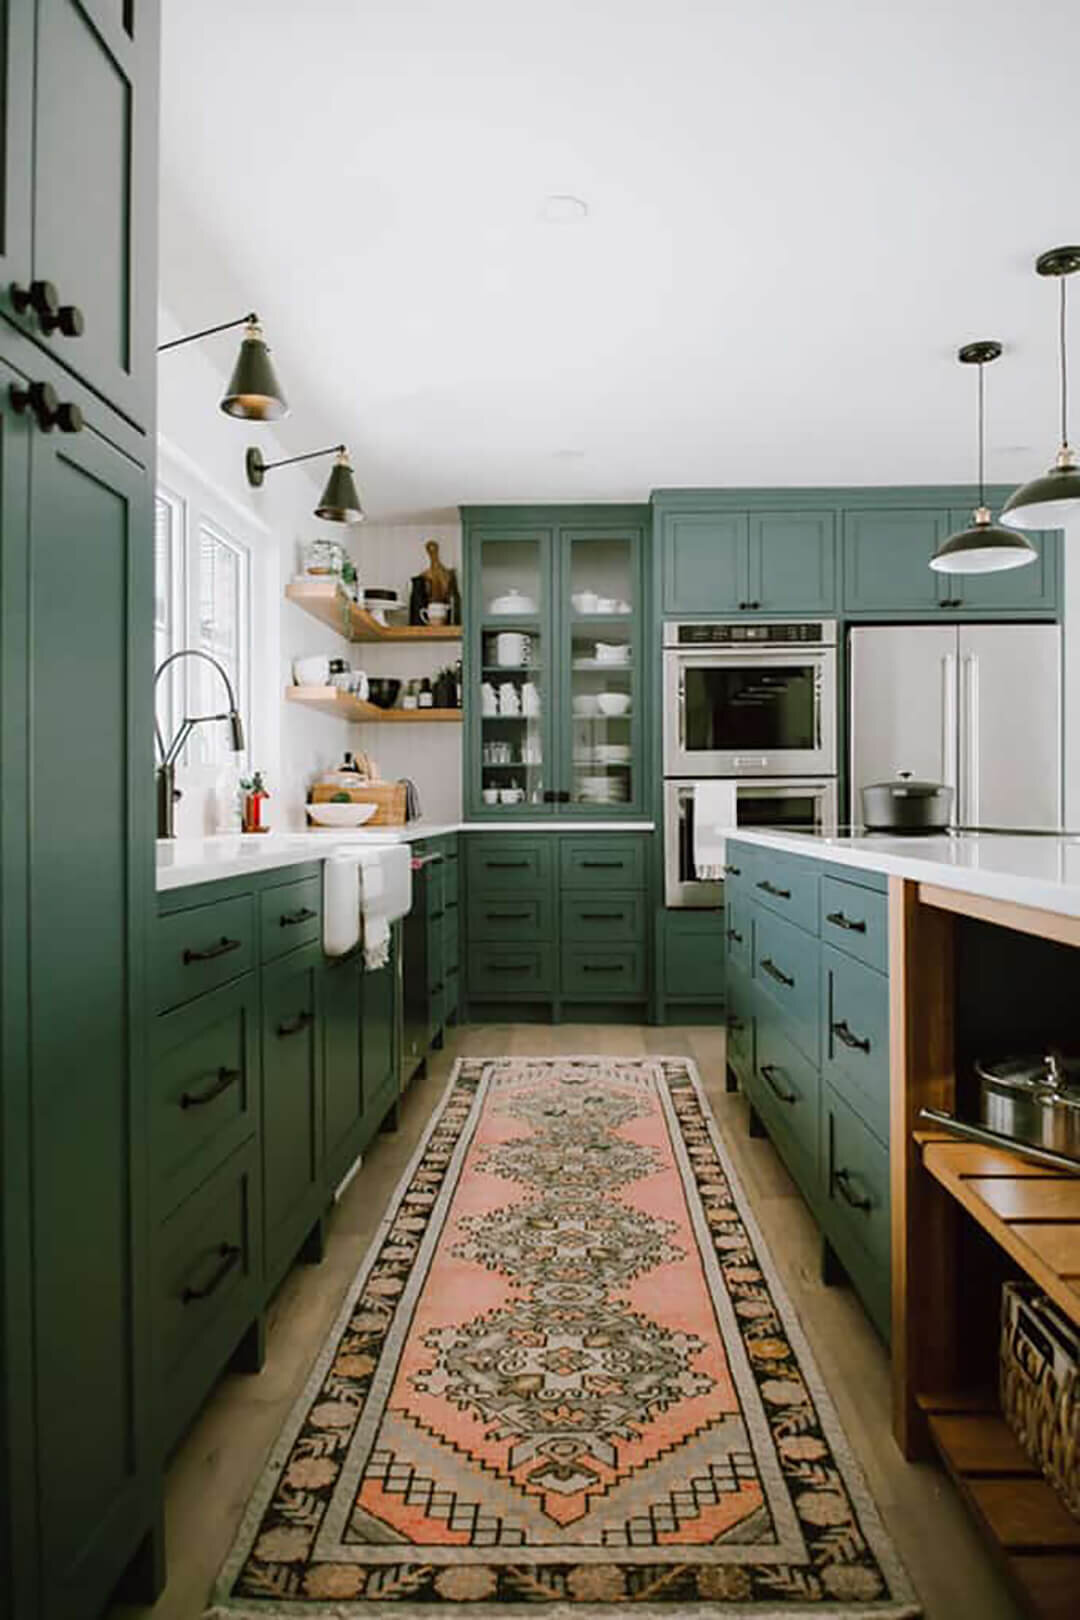 Green Kitchen Cabinet Inspiration, Images Of Kitchen Cabinets Painted Green